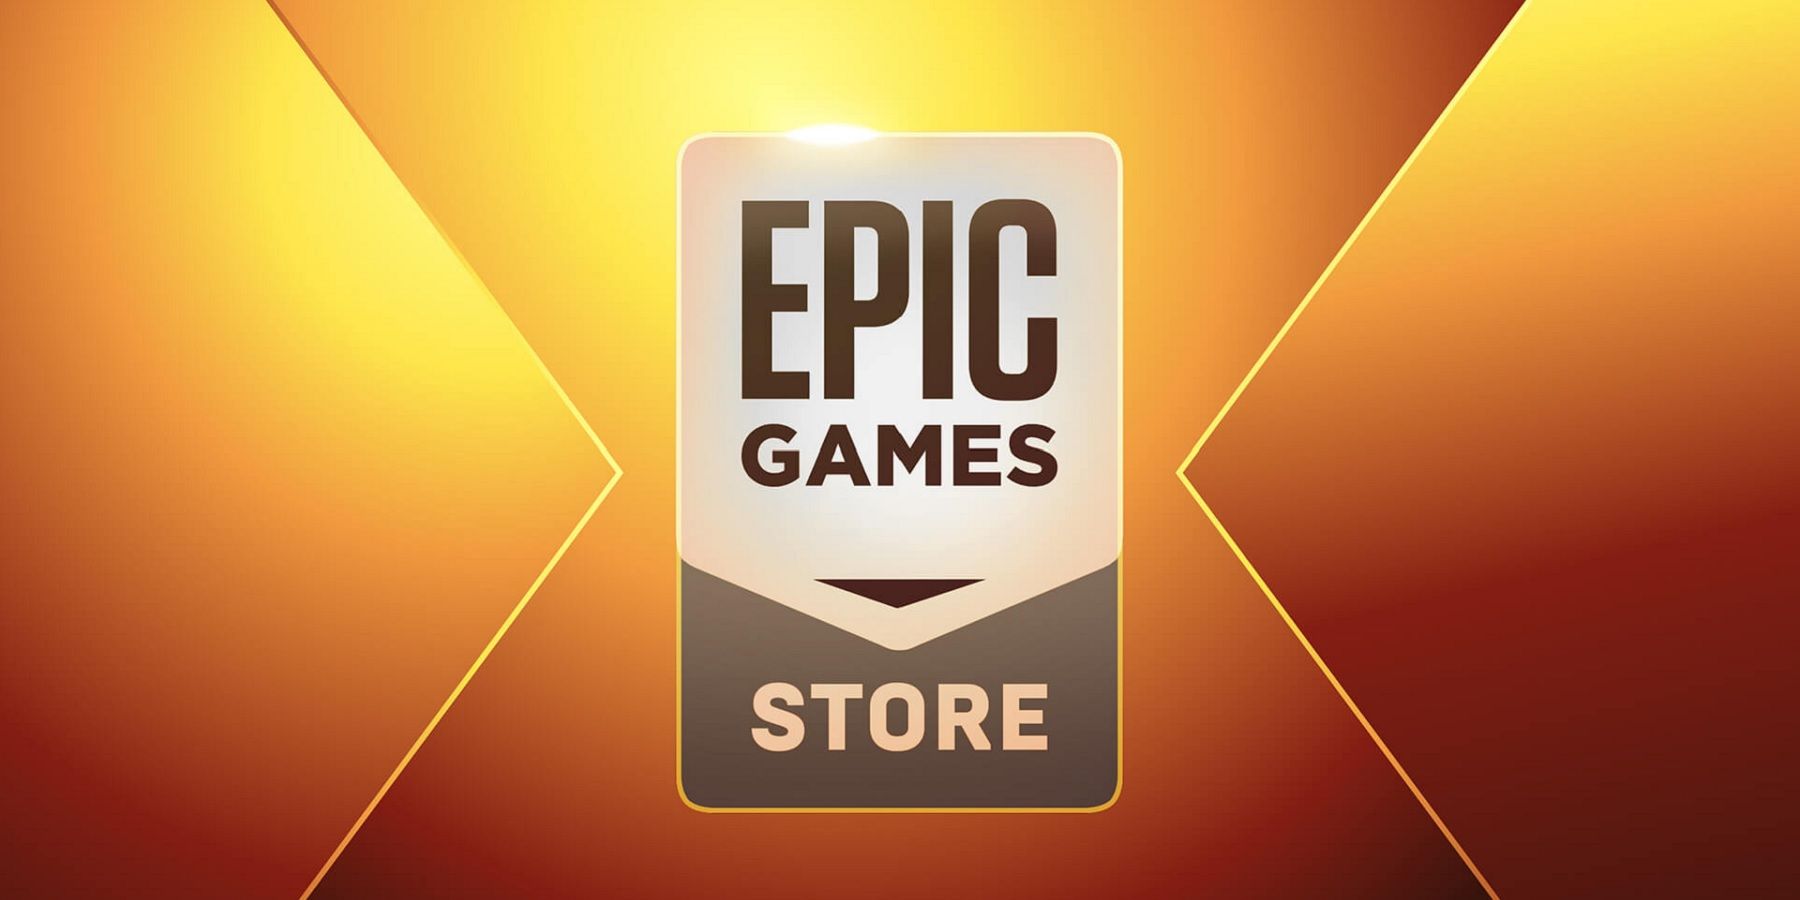 epic games store gold background